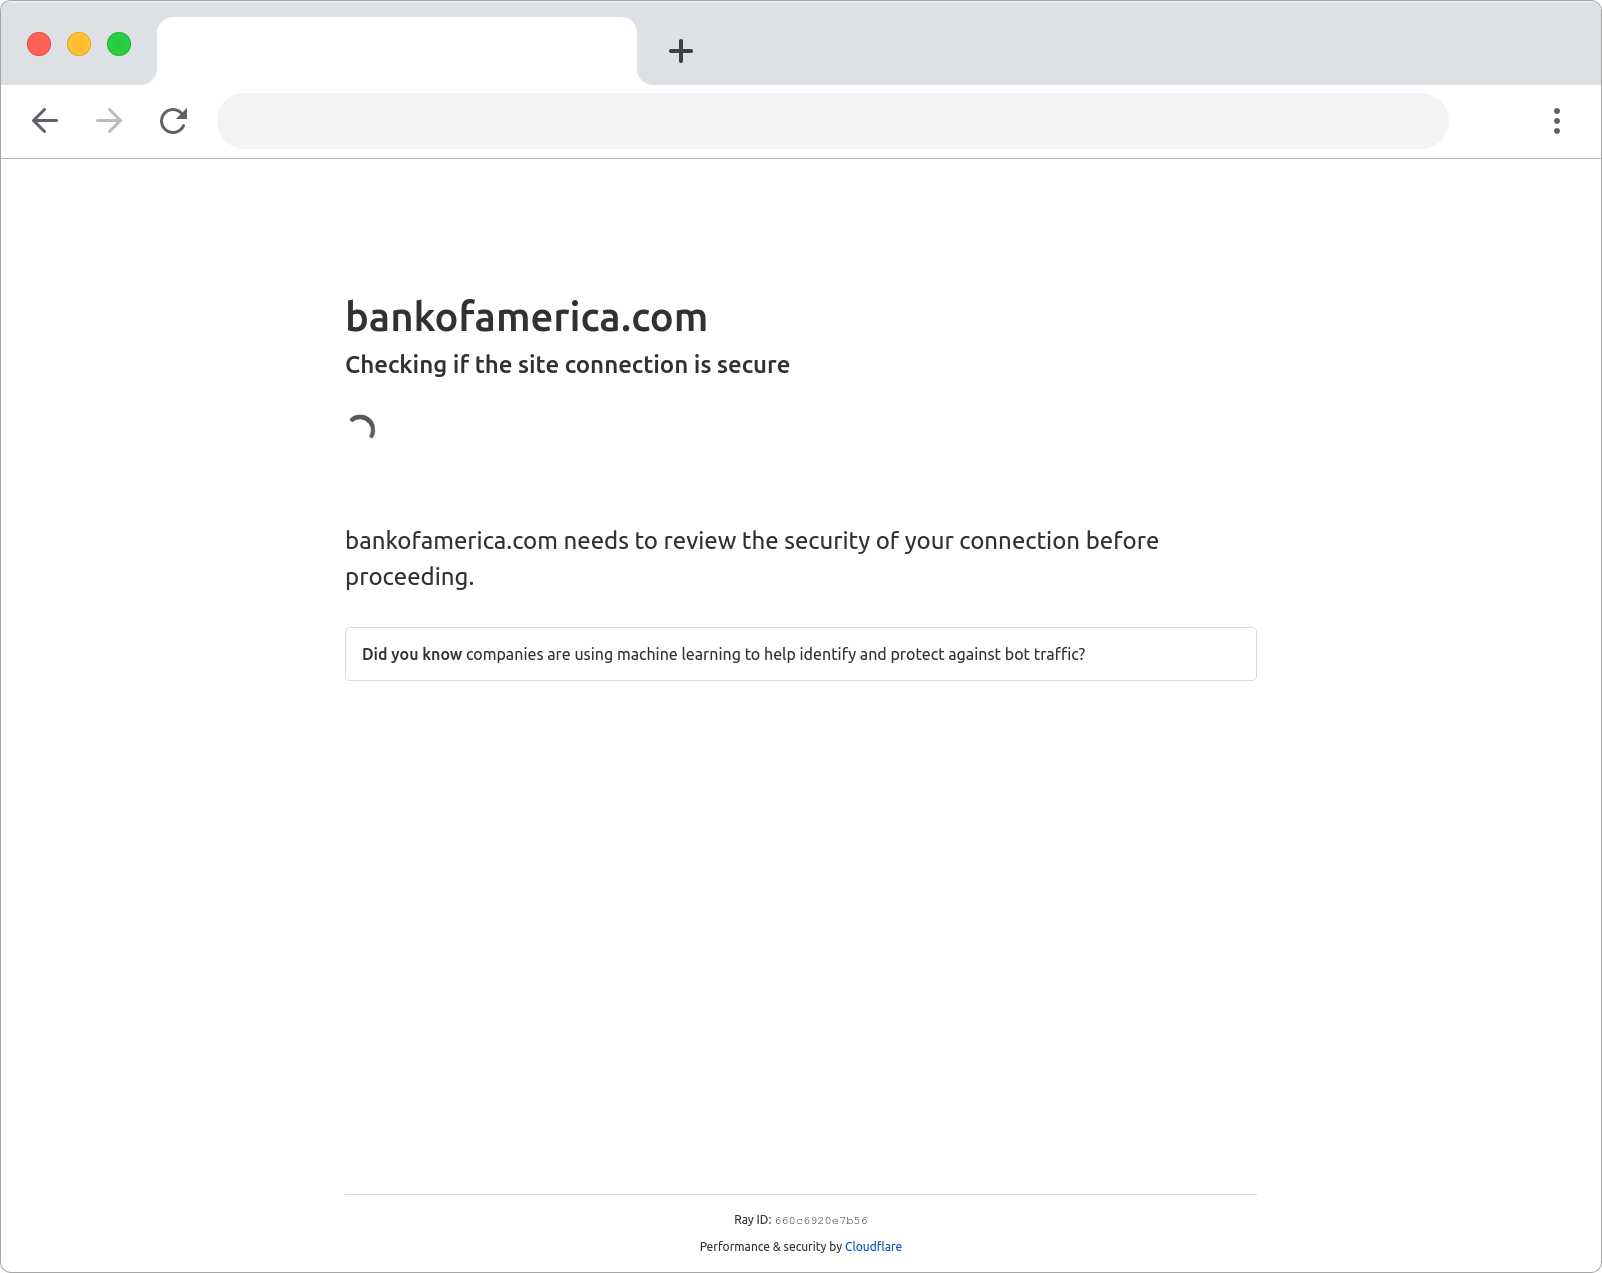 Fake Cloudflare page pretending to be Bank of America. Although this is hosted on a lookalike domain, the text on the page says that you are visiting bankofamerica.com